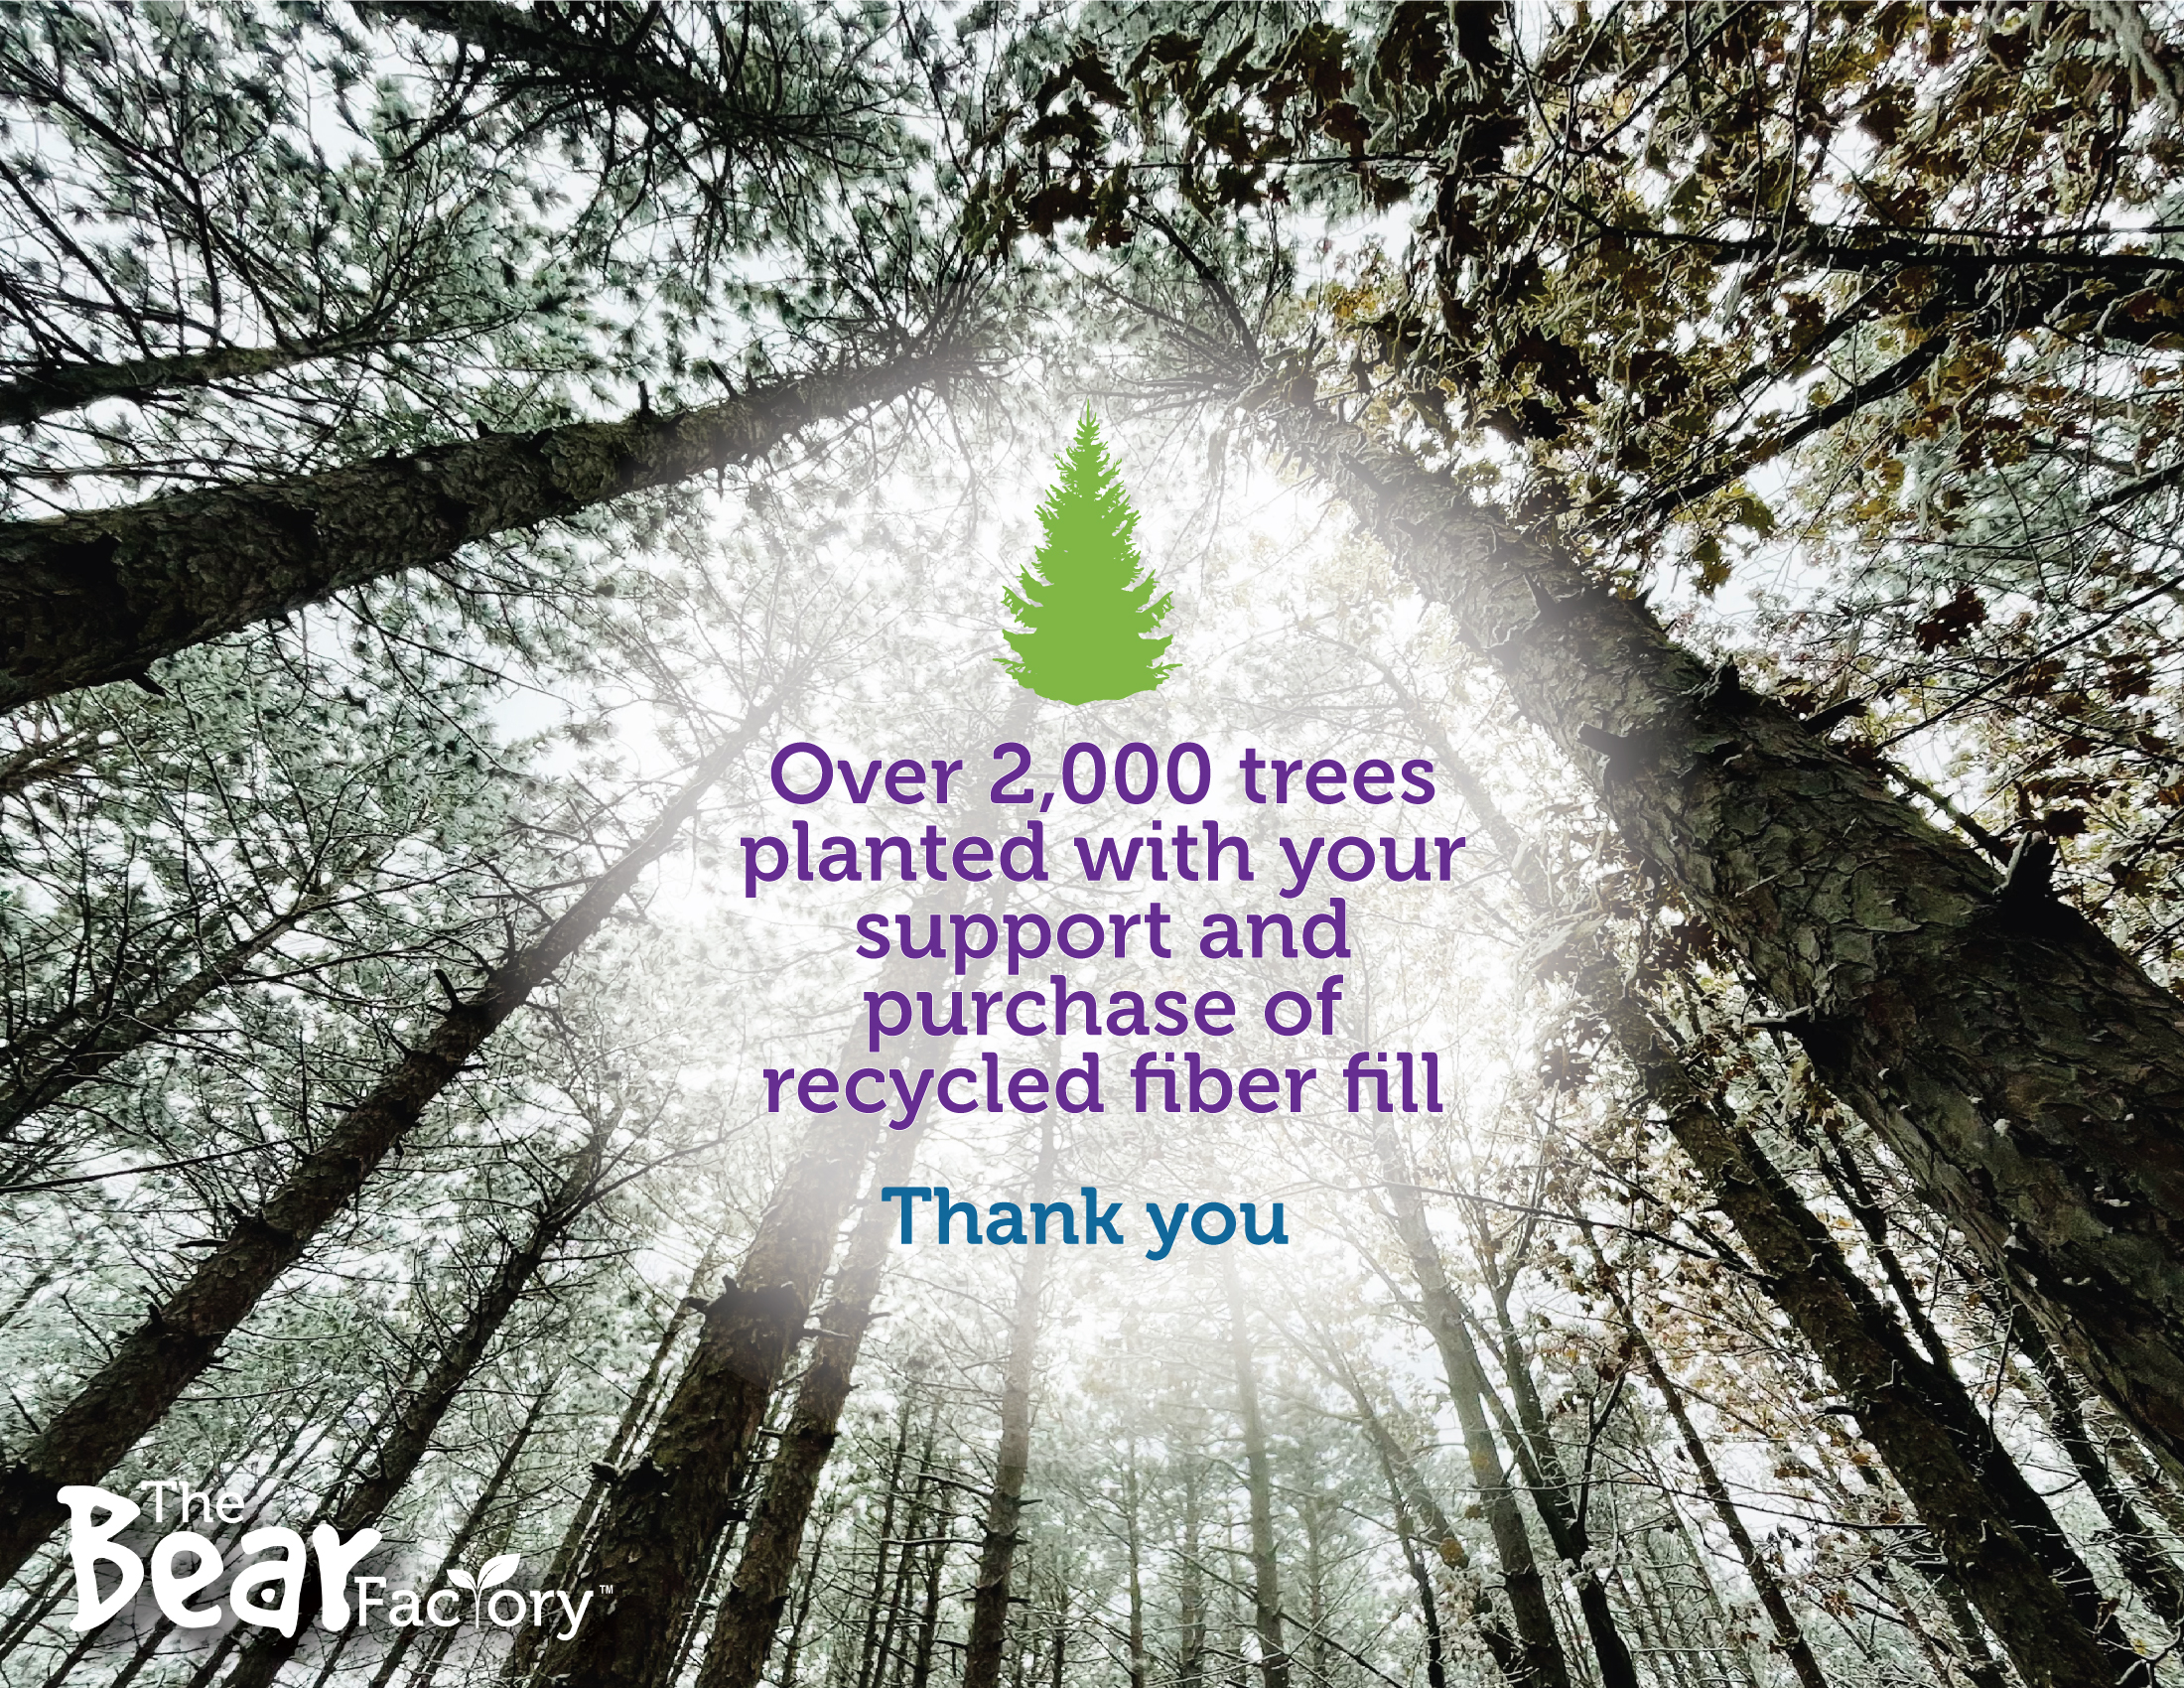 Over 2,000 tres planted with your support and purchase of recycled fiber fill. Thank you.